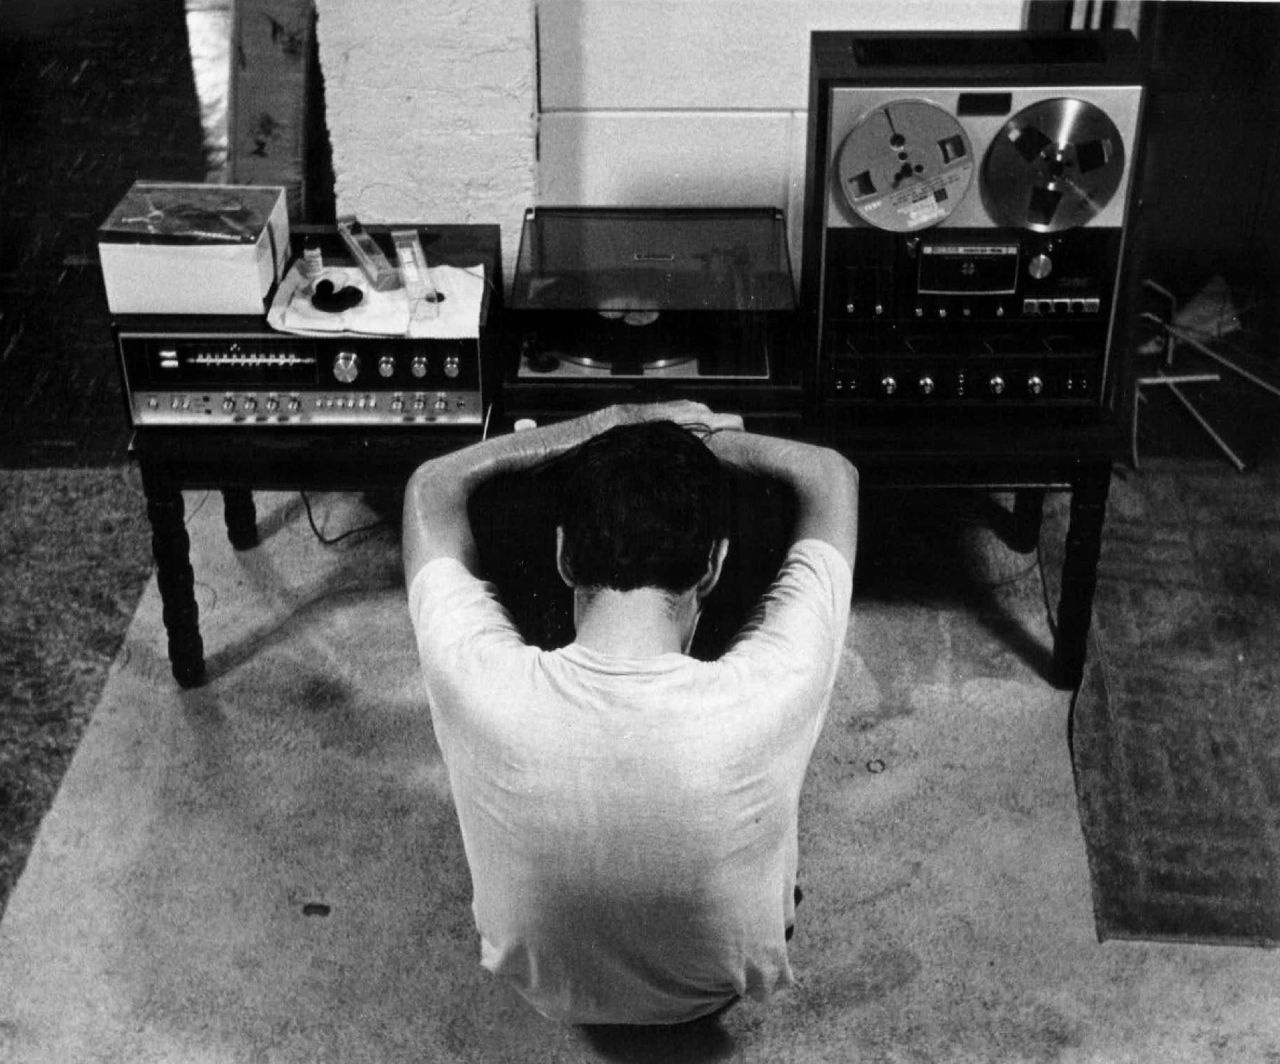 In the '60s, '70s and '80s, stereo component equipment became affordable to the mass consumer. Systems generally consisted of a receiver, a turntable, some kind of tape player and speakers. 